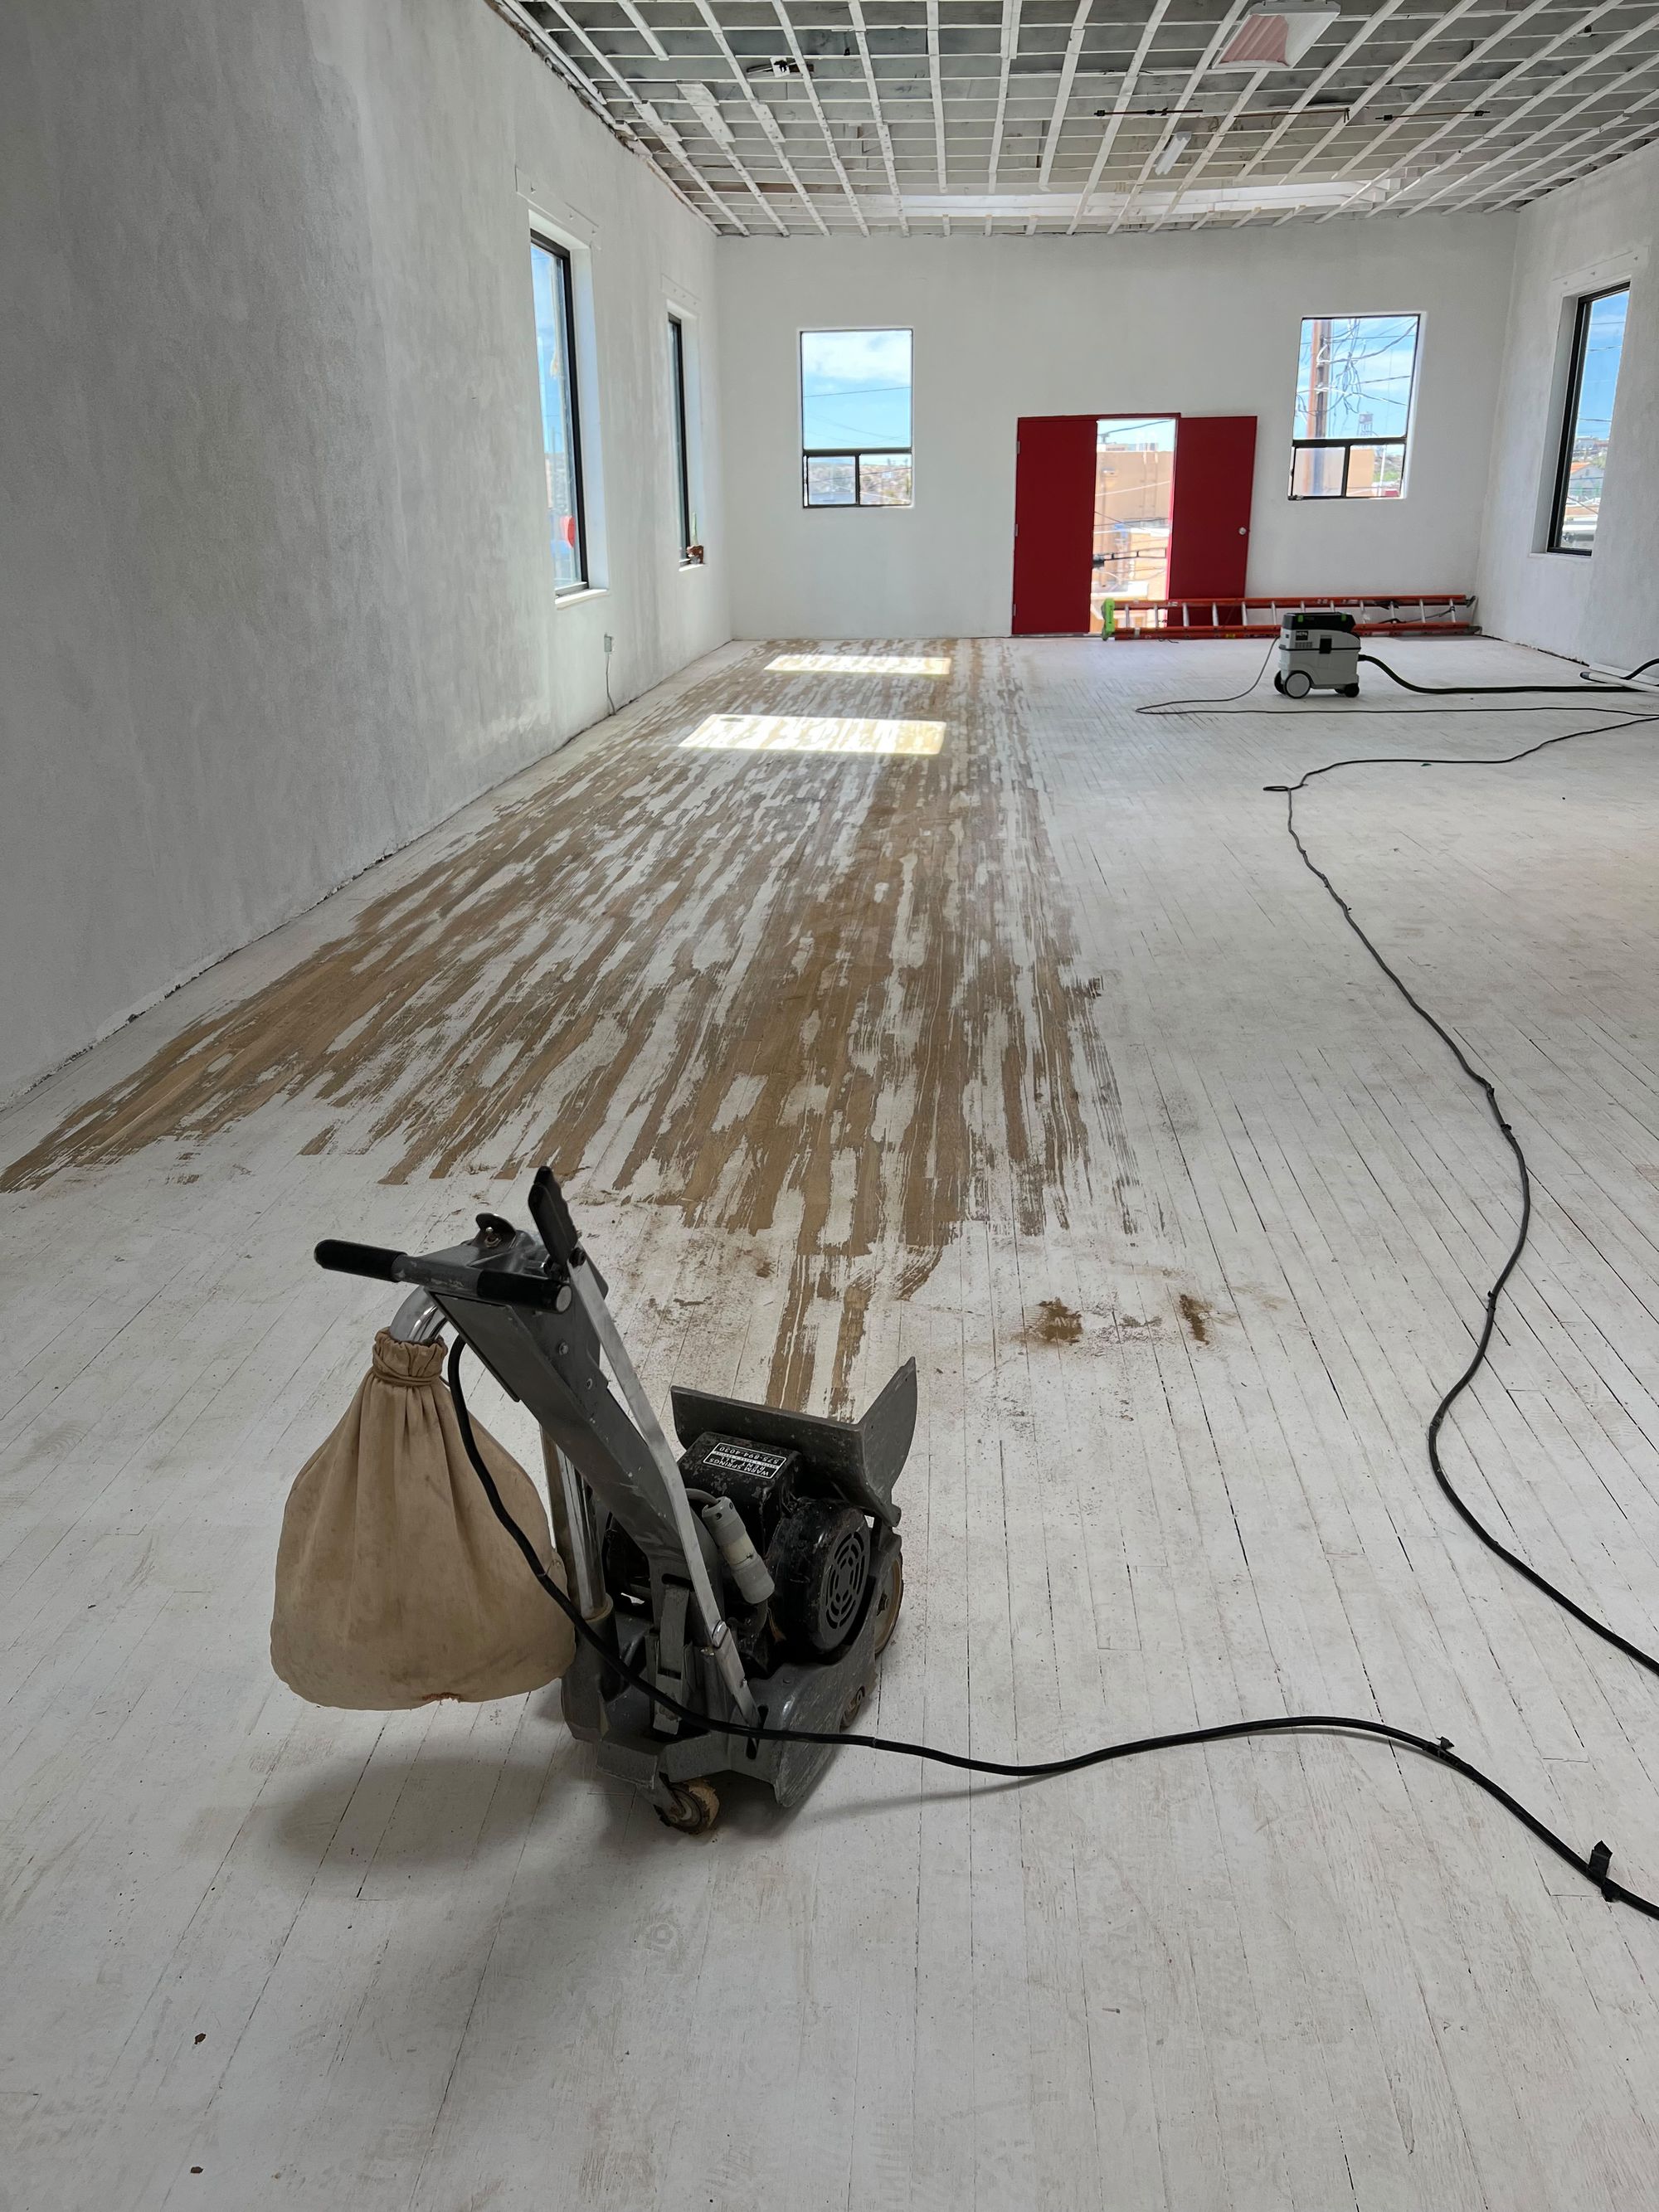 A floor drum sander sits ready to do good work on a white painted wooden floor.